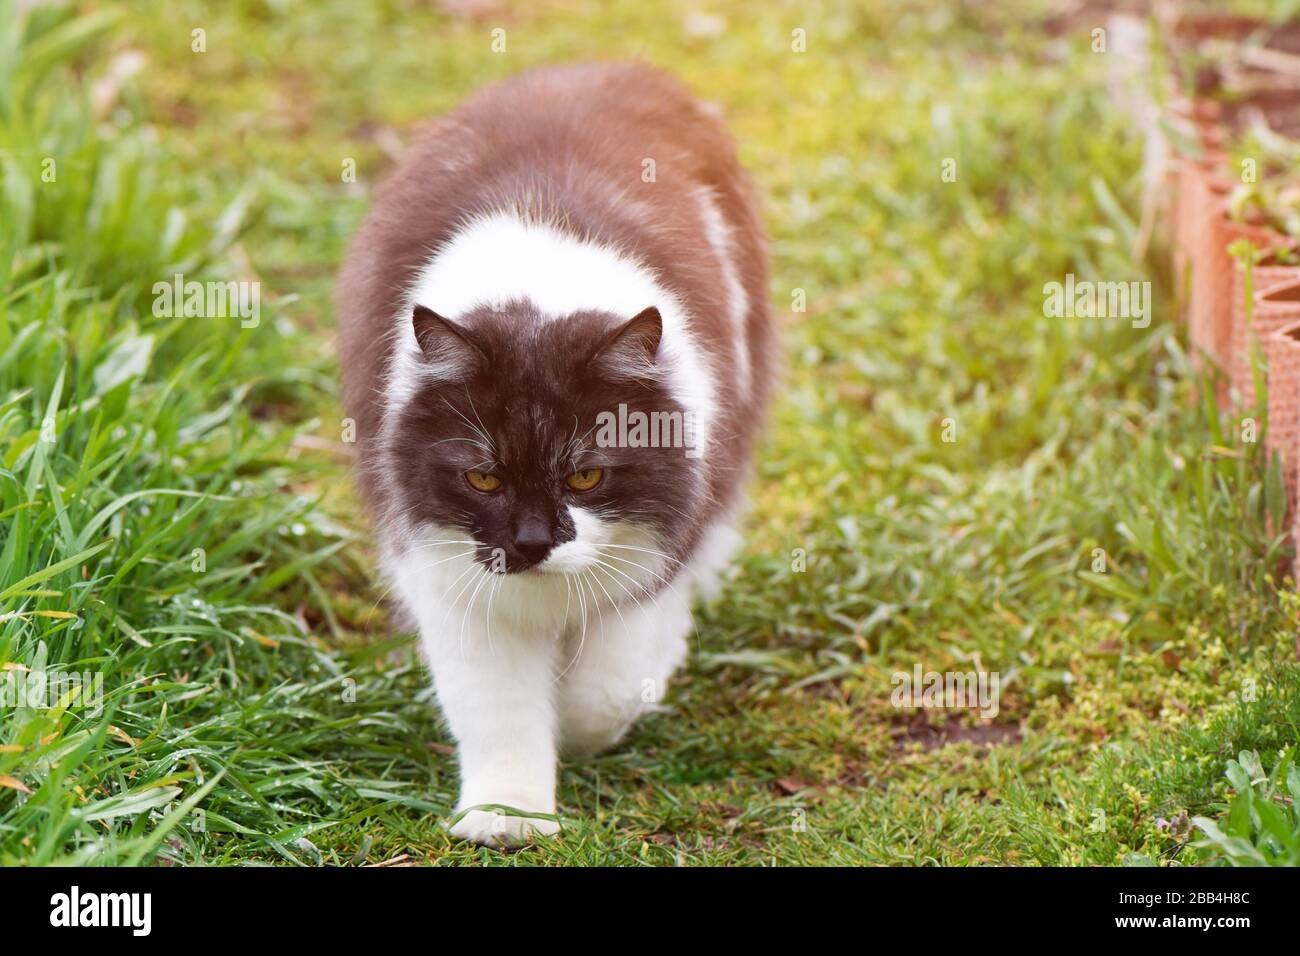 Black and white cat in the garden. Stock Photo